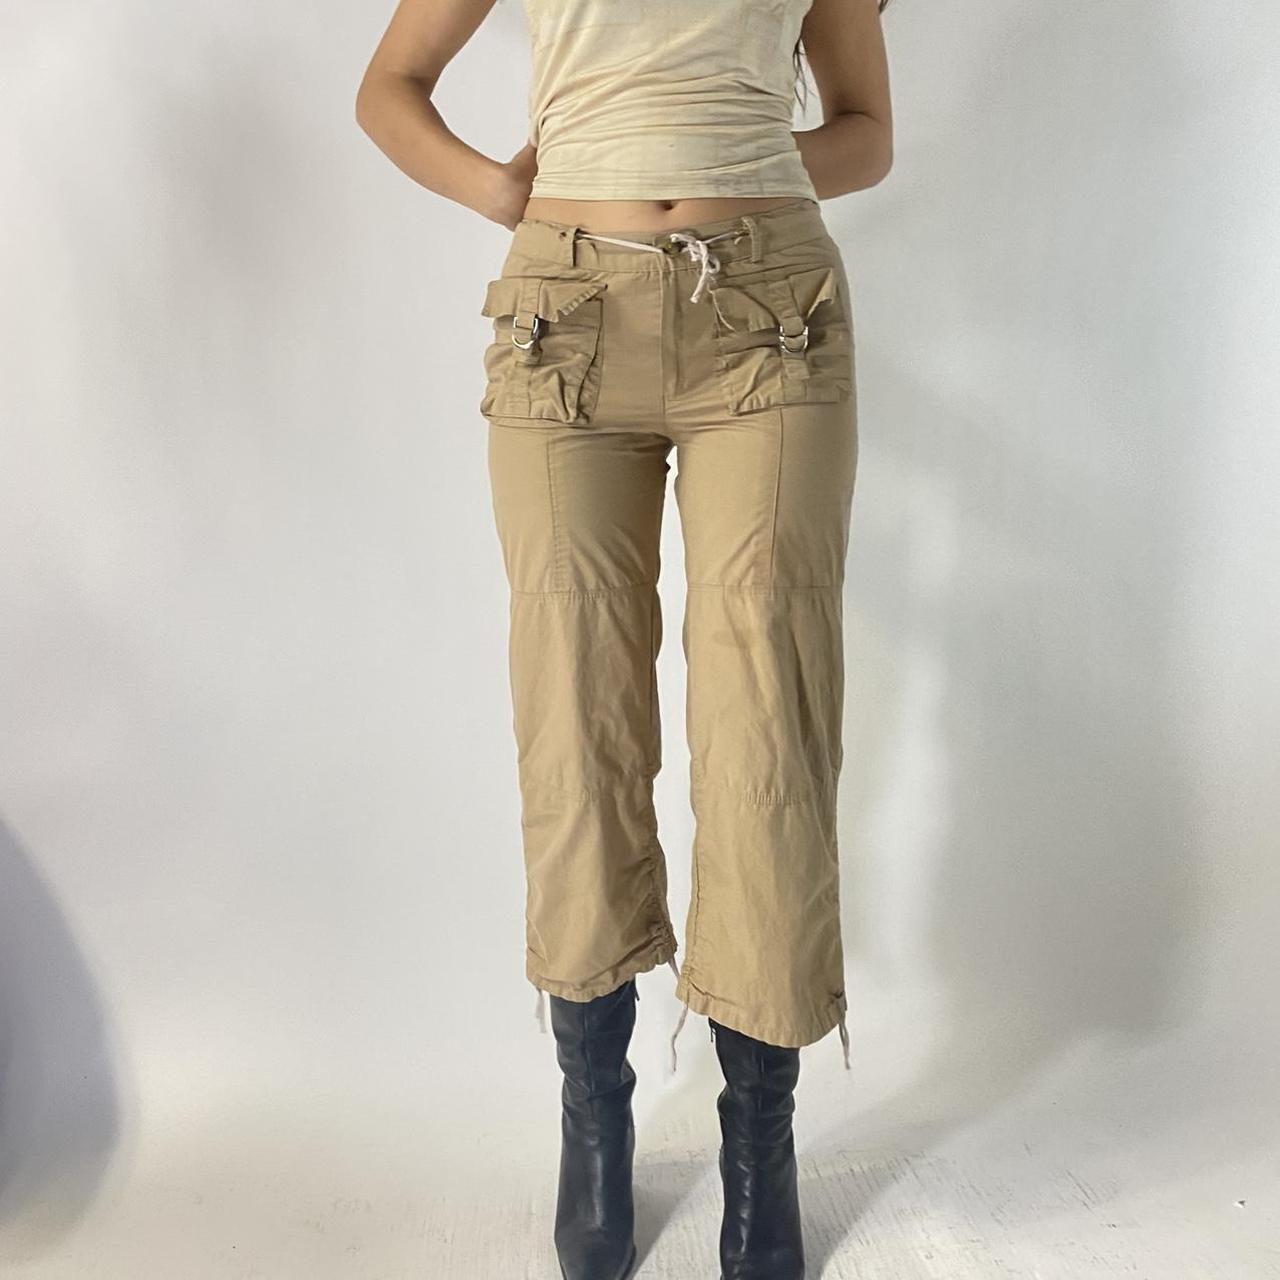 Dockers Women's Tan and Brown Trousers (2)